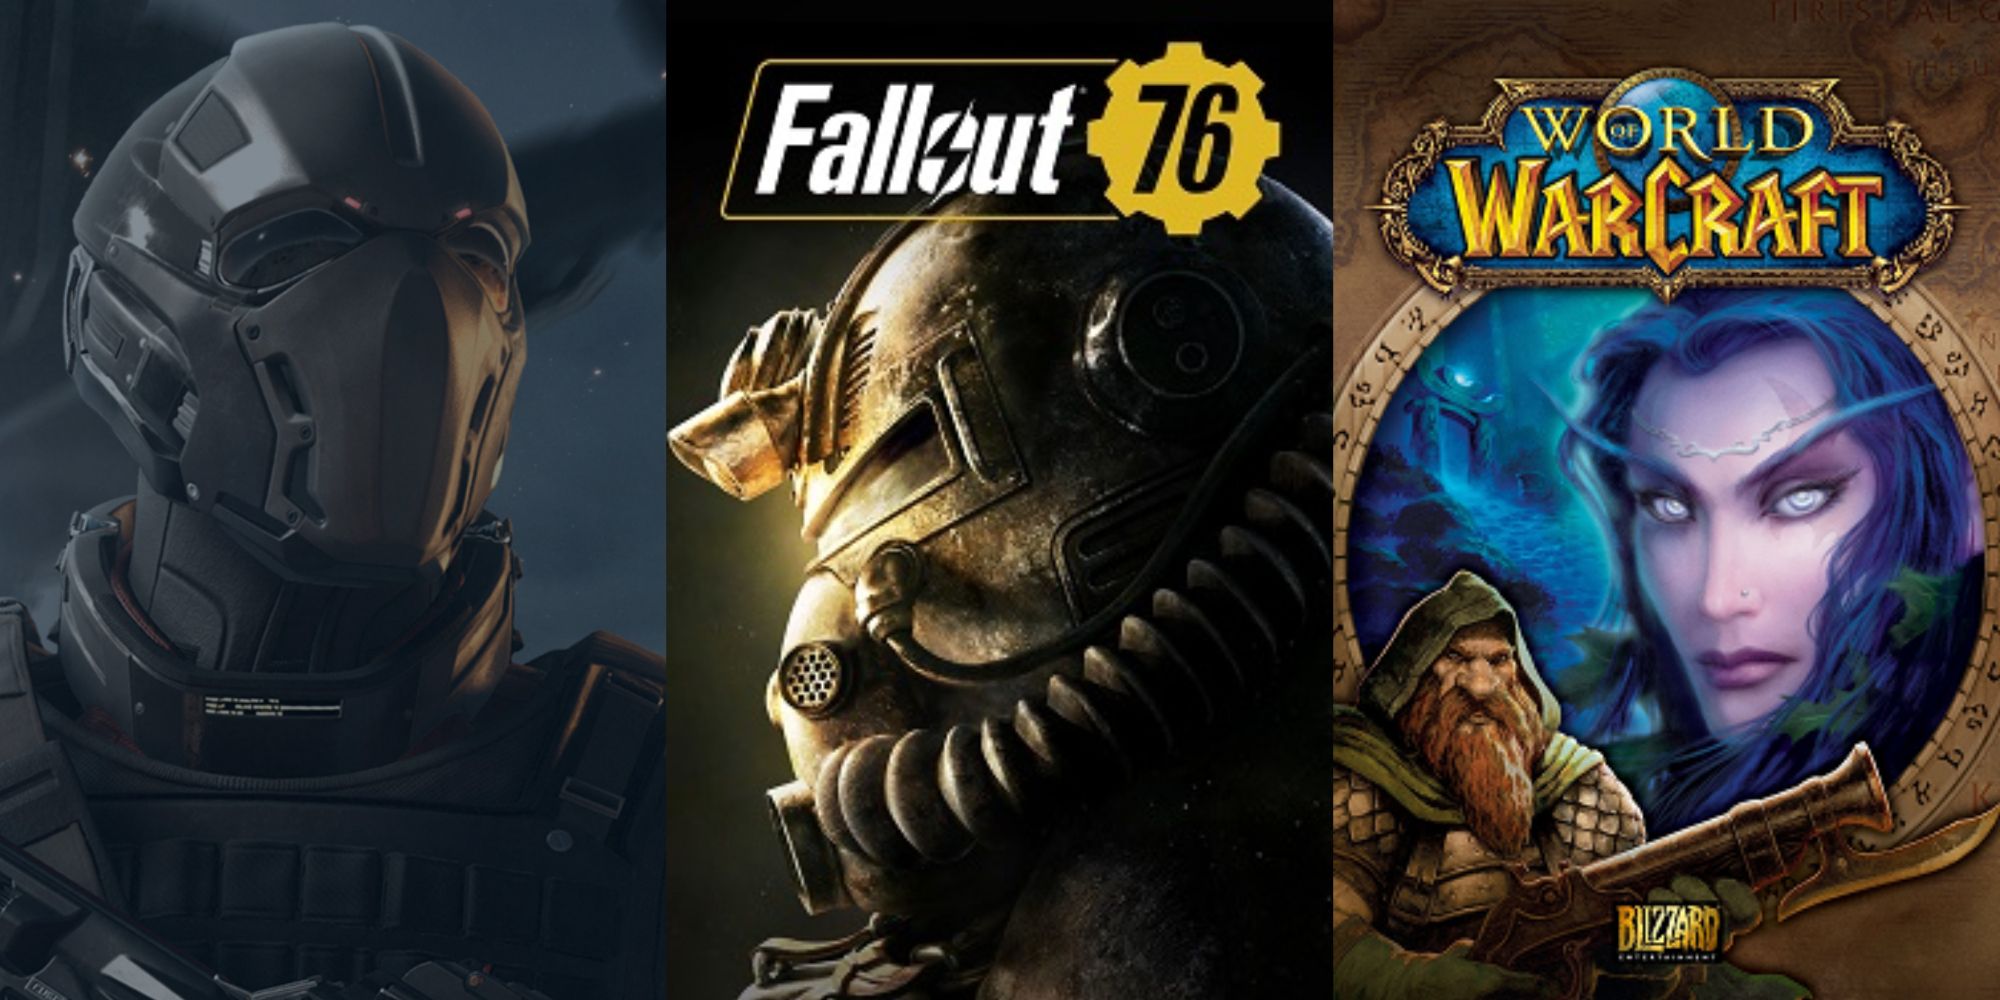 Split Image Star Citizen Character, Fallout 76 poster, WOW Promo